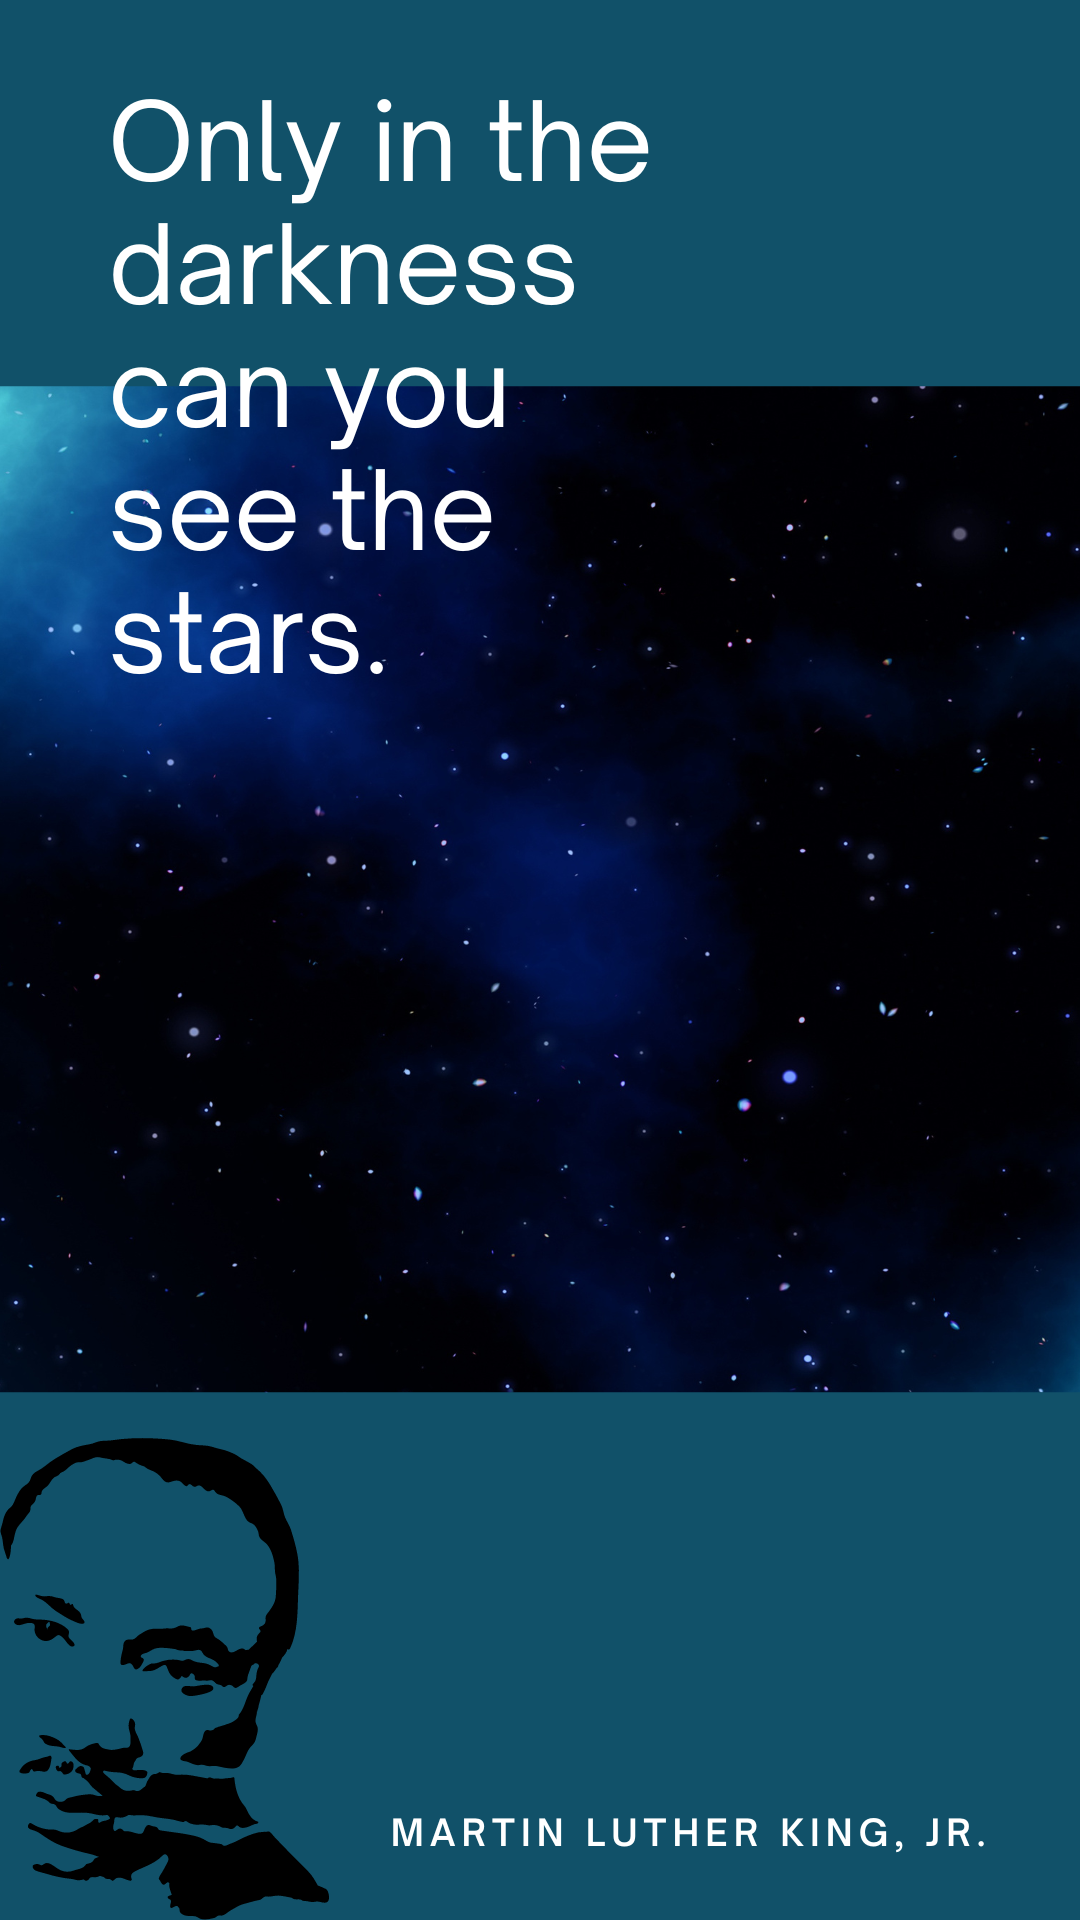 Image of MLK JR and stars with text quoting, "Only in the darkness can you see the stars." "Martin Luther King Jr."